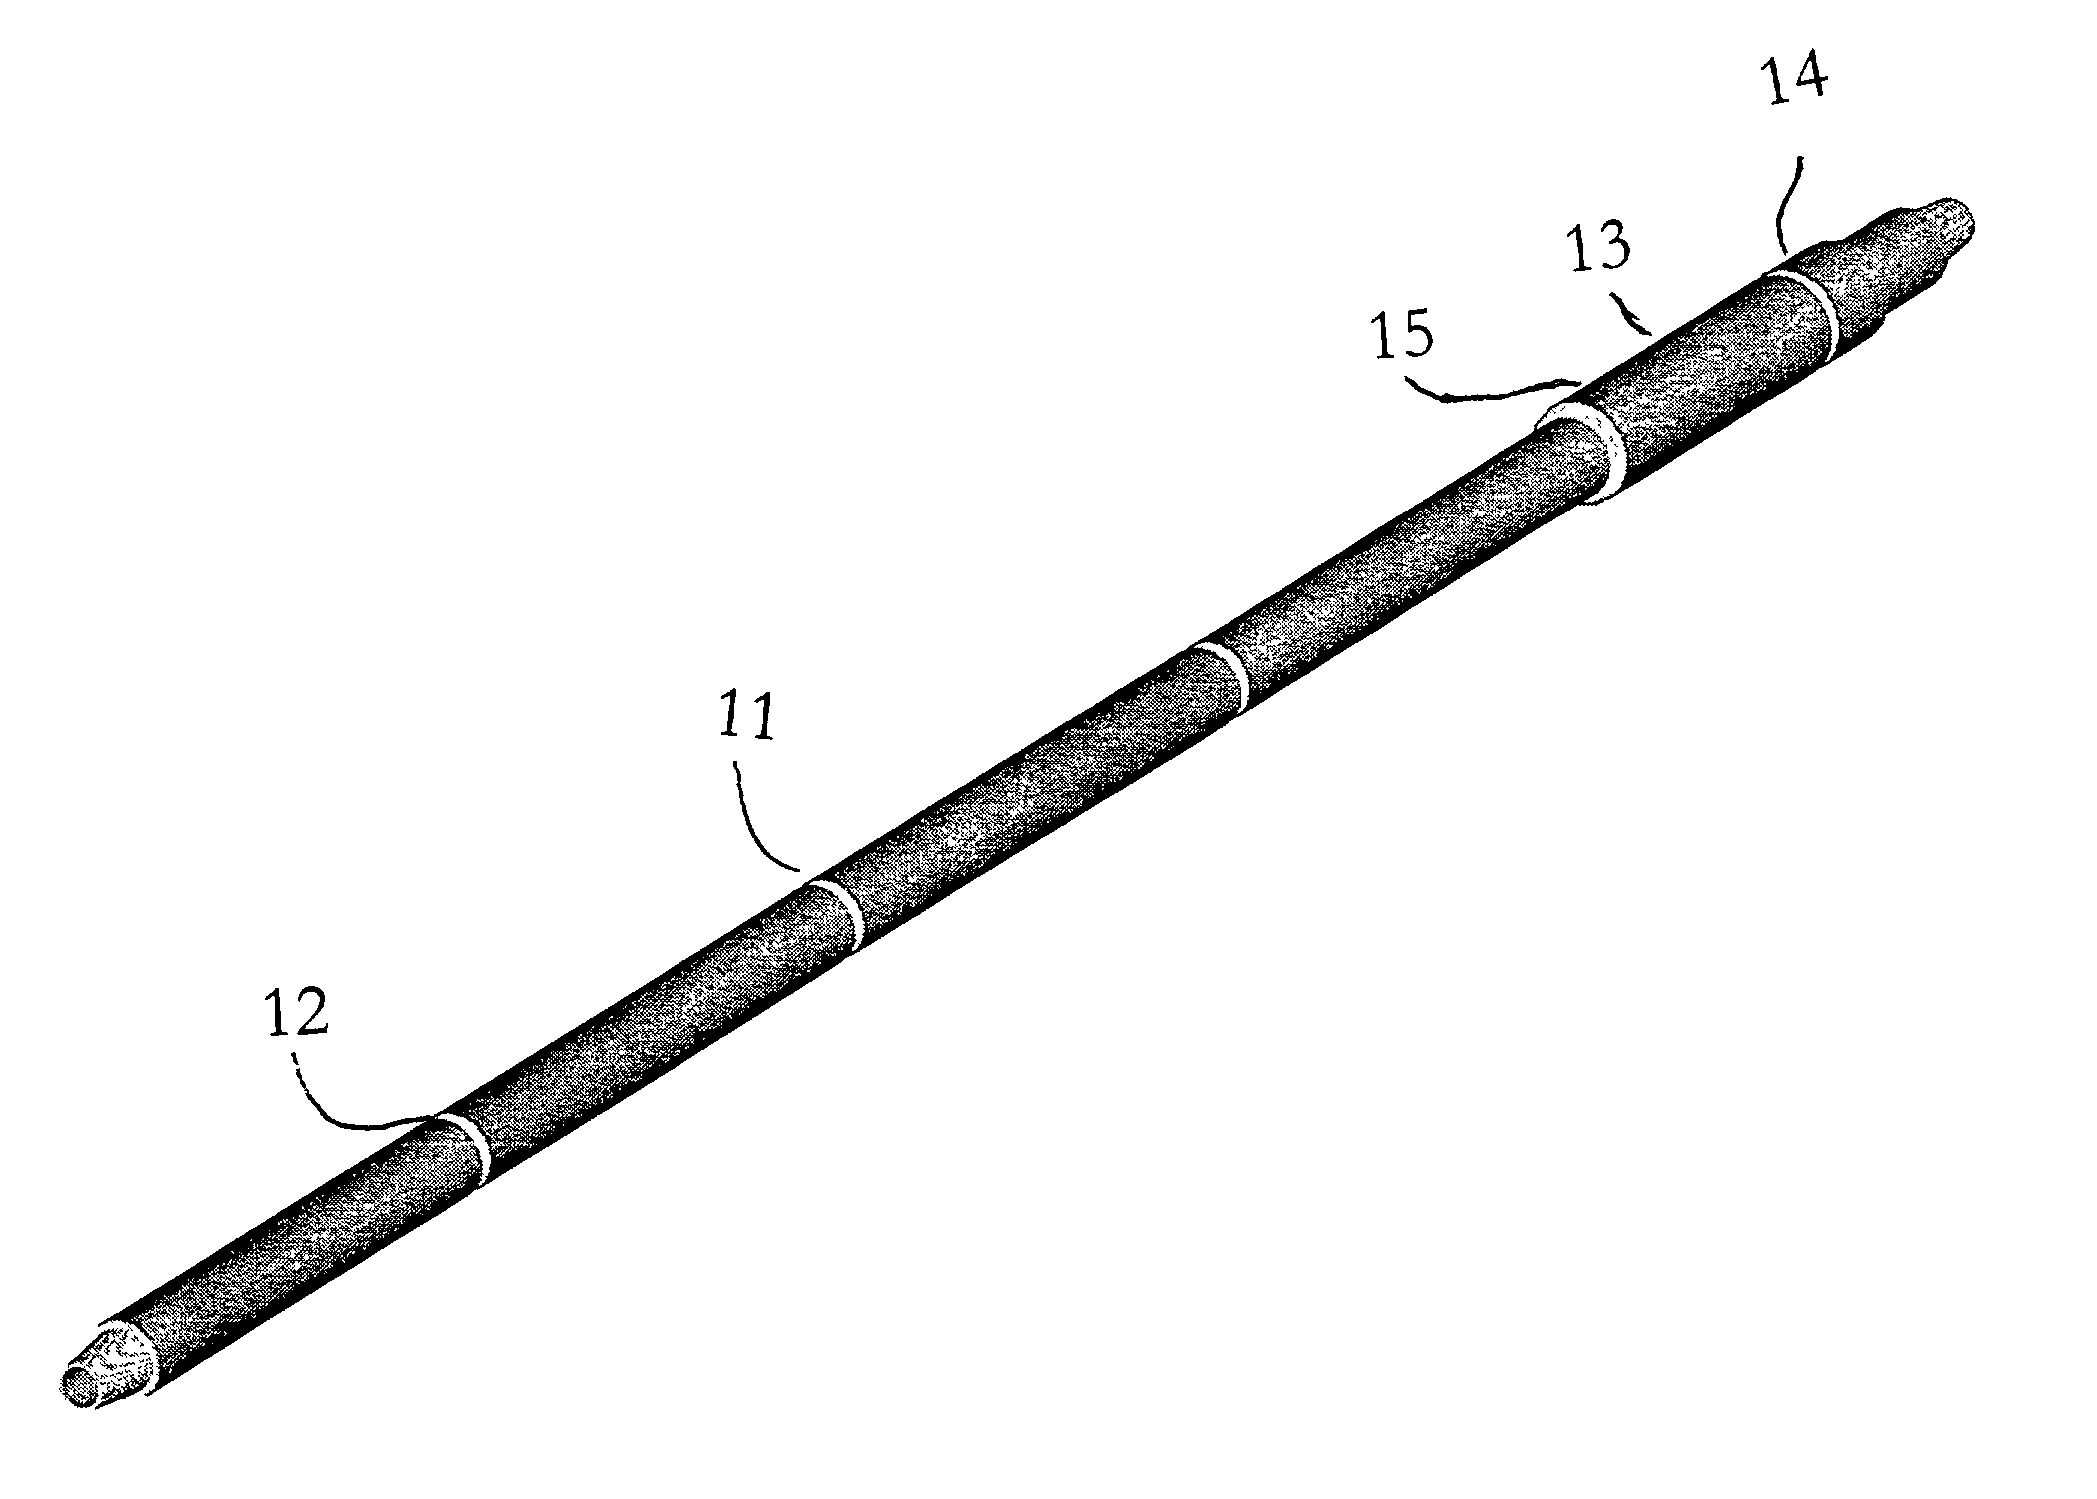 Signal connection for a downhole tool string